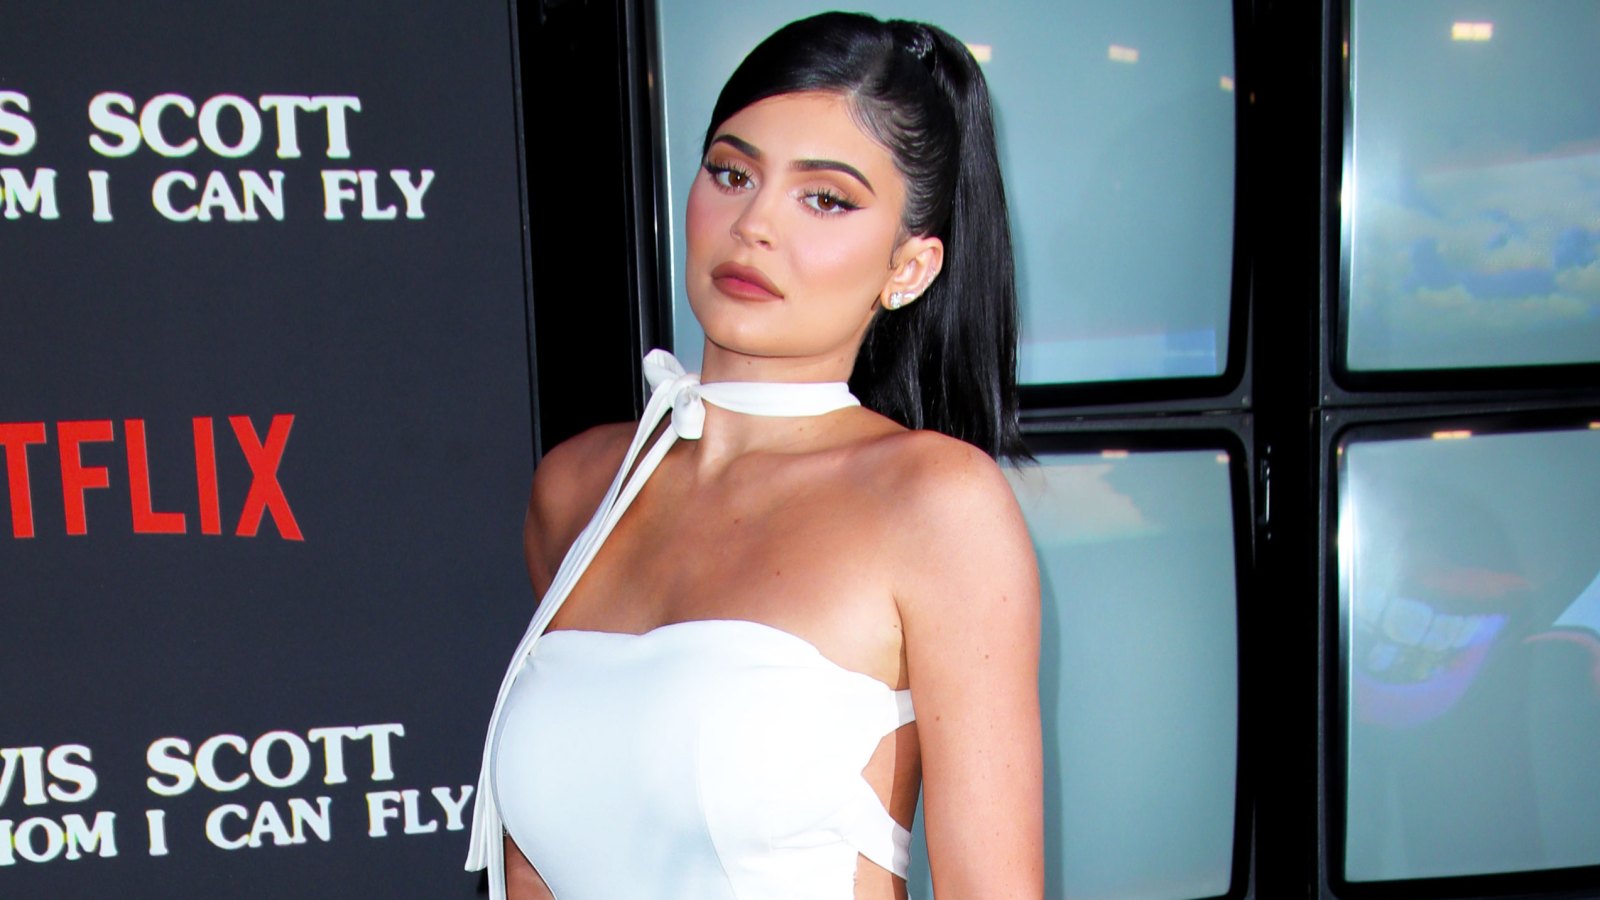 Kylie Jenner Says She Doesn't Want Another Baby Right Now: 'Pregnancy Is Not a Joke'